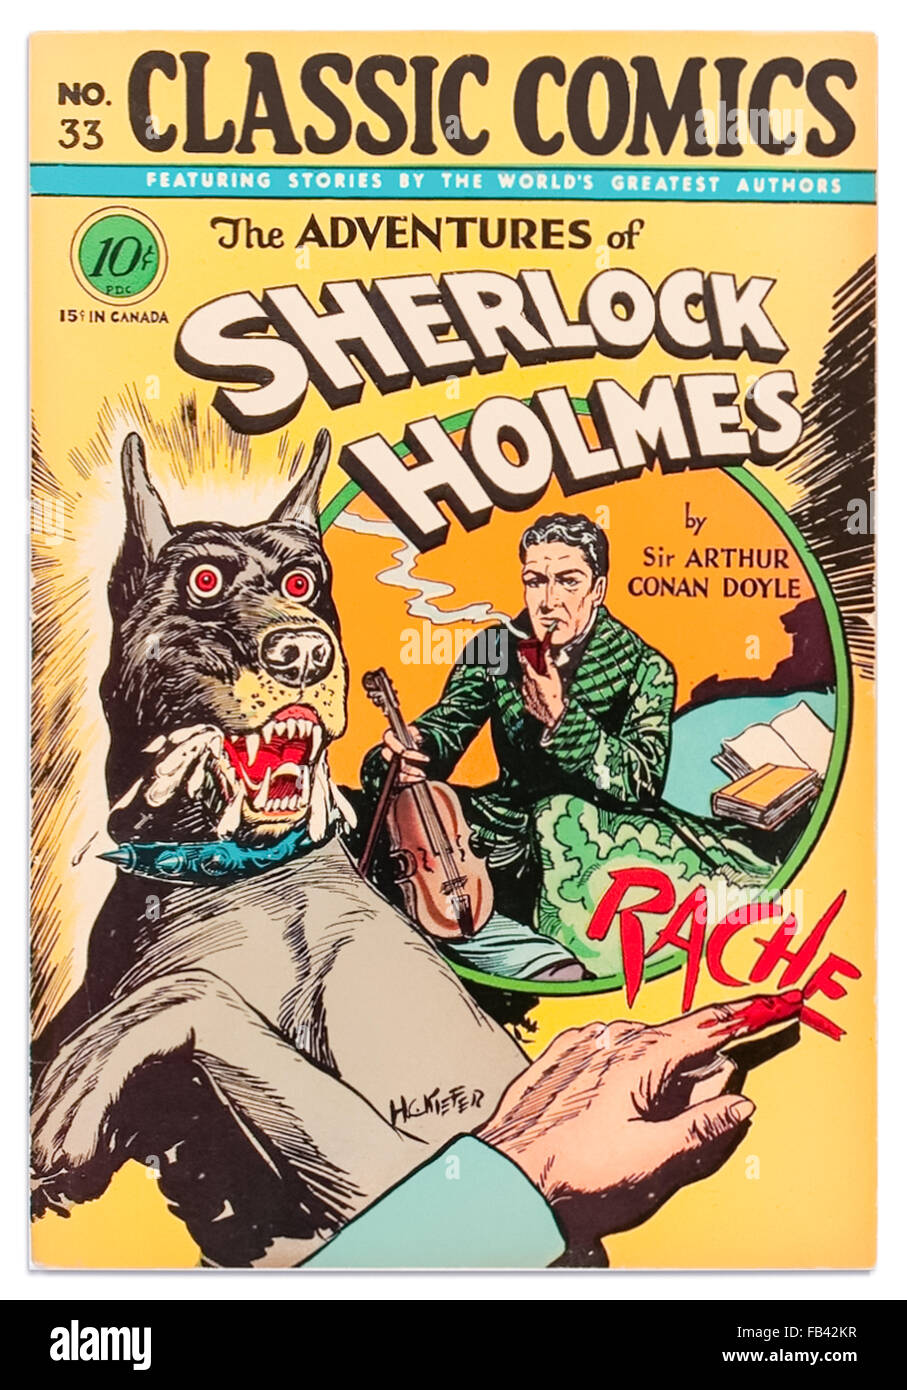 'The Adventures of Sherlock Holmes' Classic Comic Issue 33 1947, comic book adaptation of 'A Study in Scarlet' and 'The Hound of the Baskervilles' by Sir Arthur Conan Doyle (1859-1930); art by Henry Carl Kiefer (1890-1957). Stock Photo